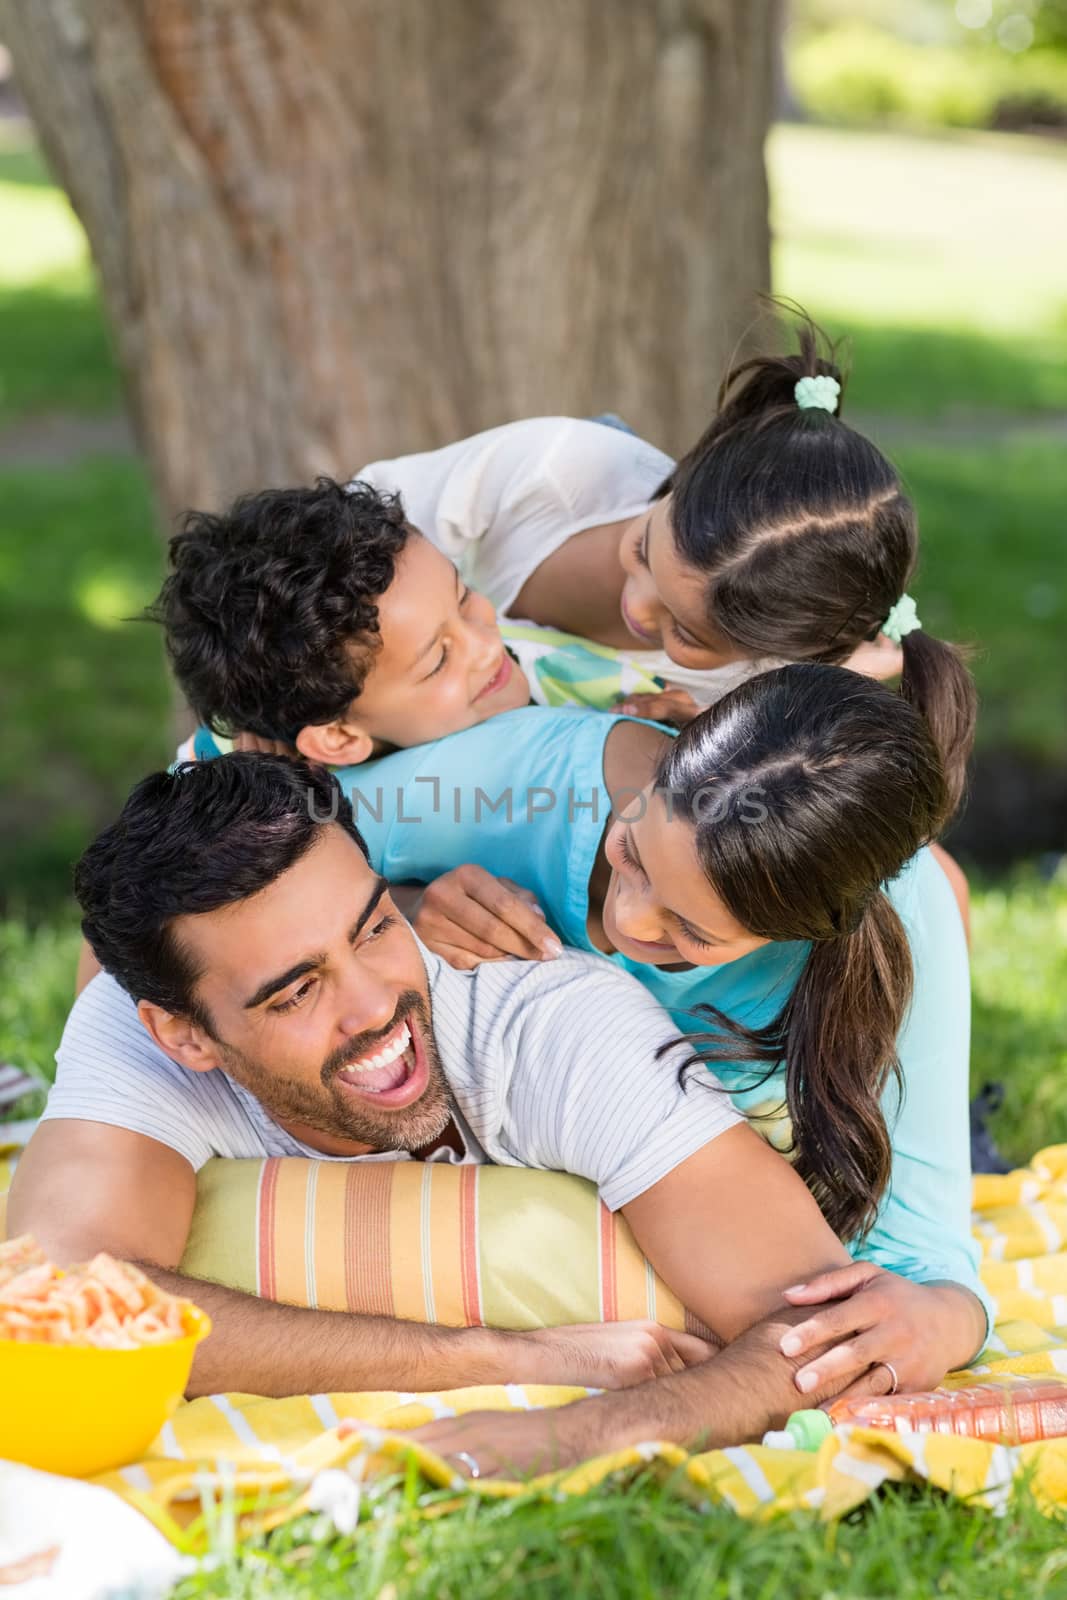 Portrait of happy family enjoying together in park on a sunny day